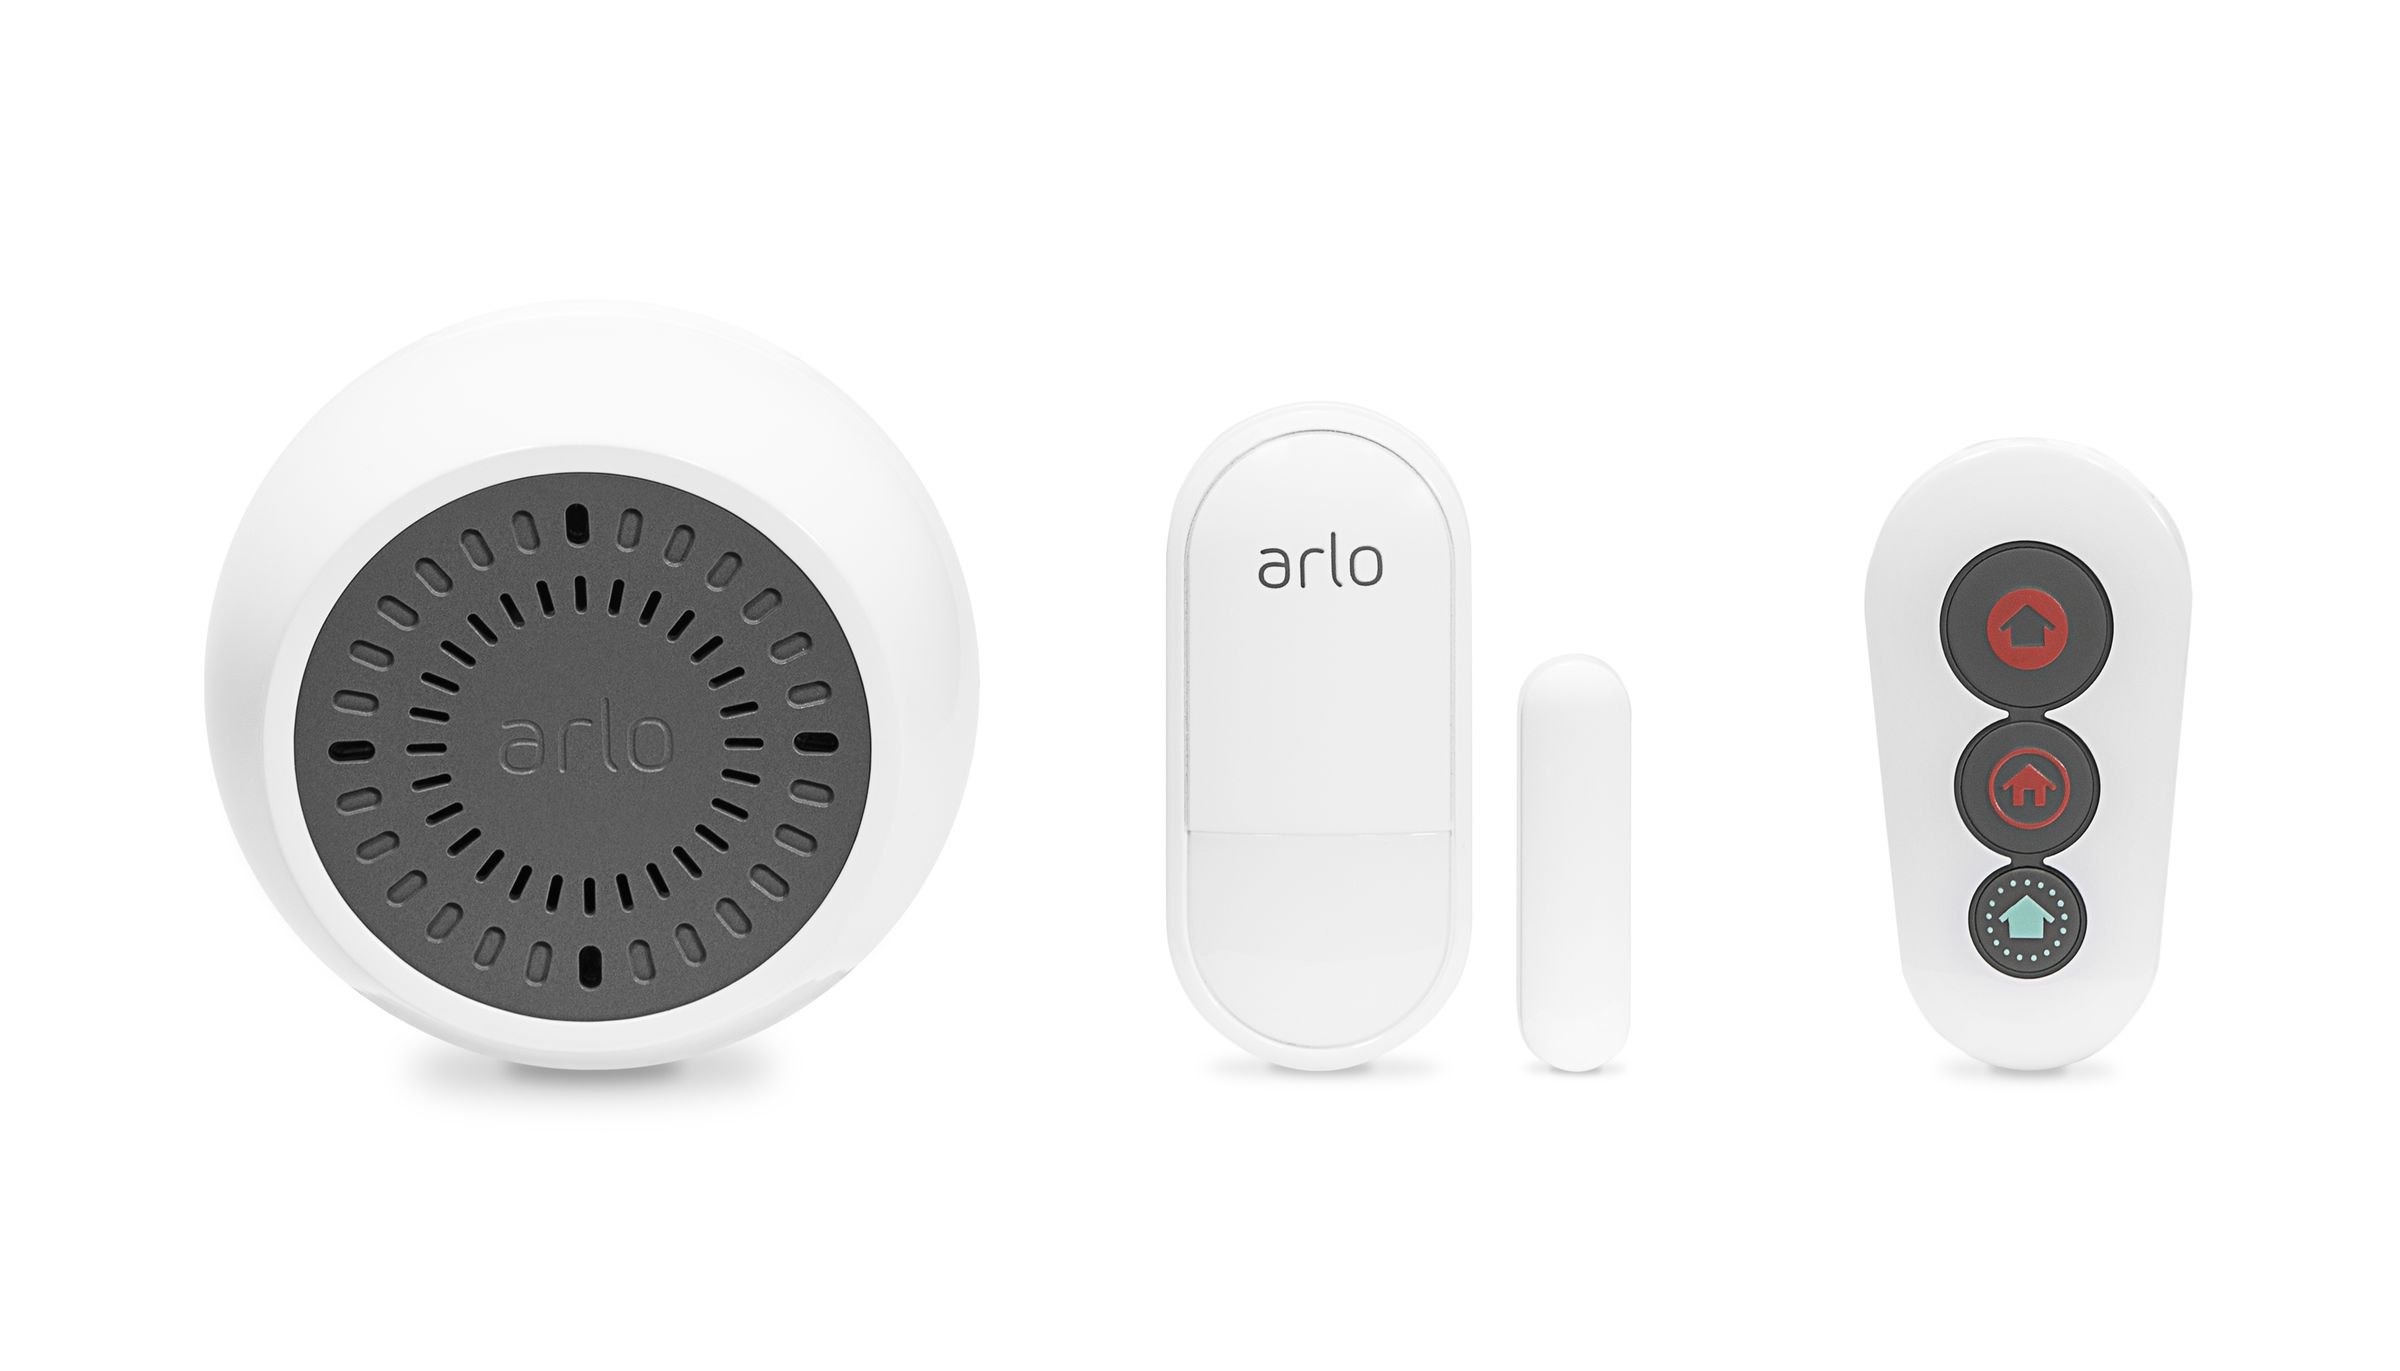 From left to right, the Arlo Security System’s Siren,  its multi-purpose sensor, and its remote control.